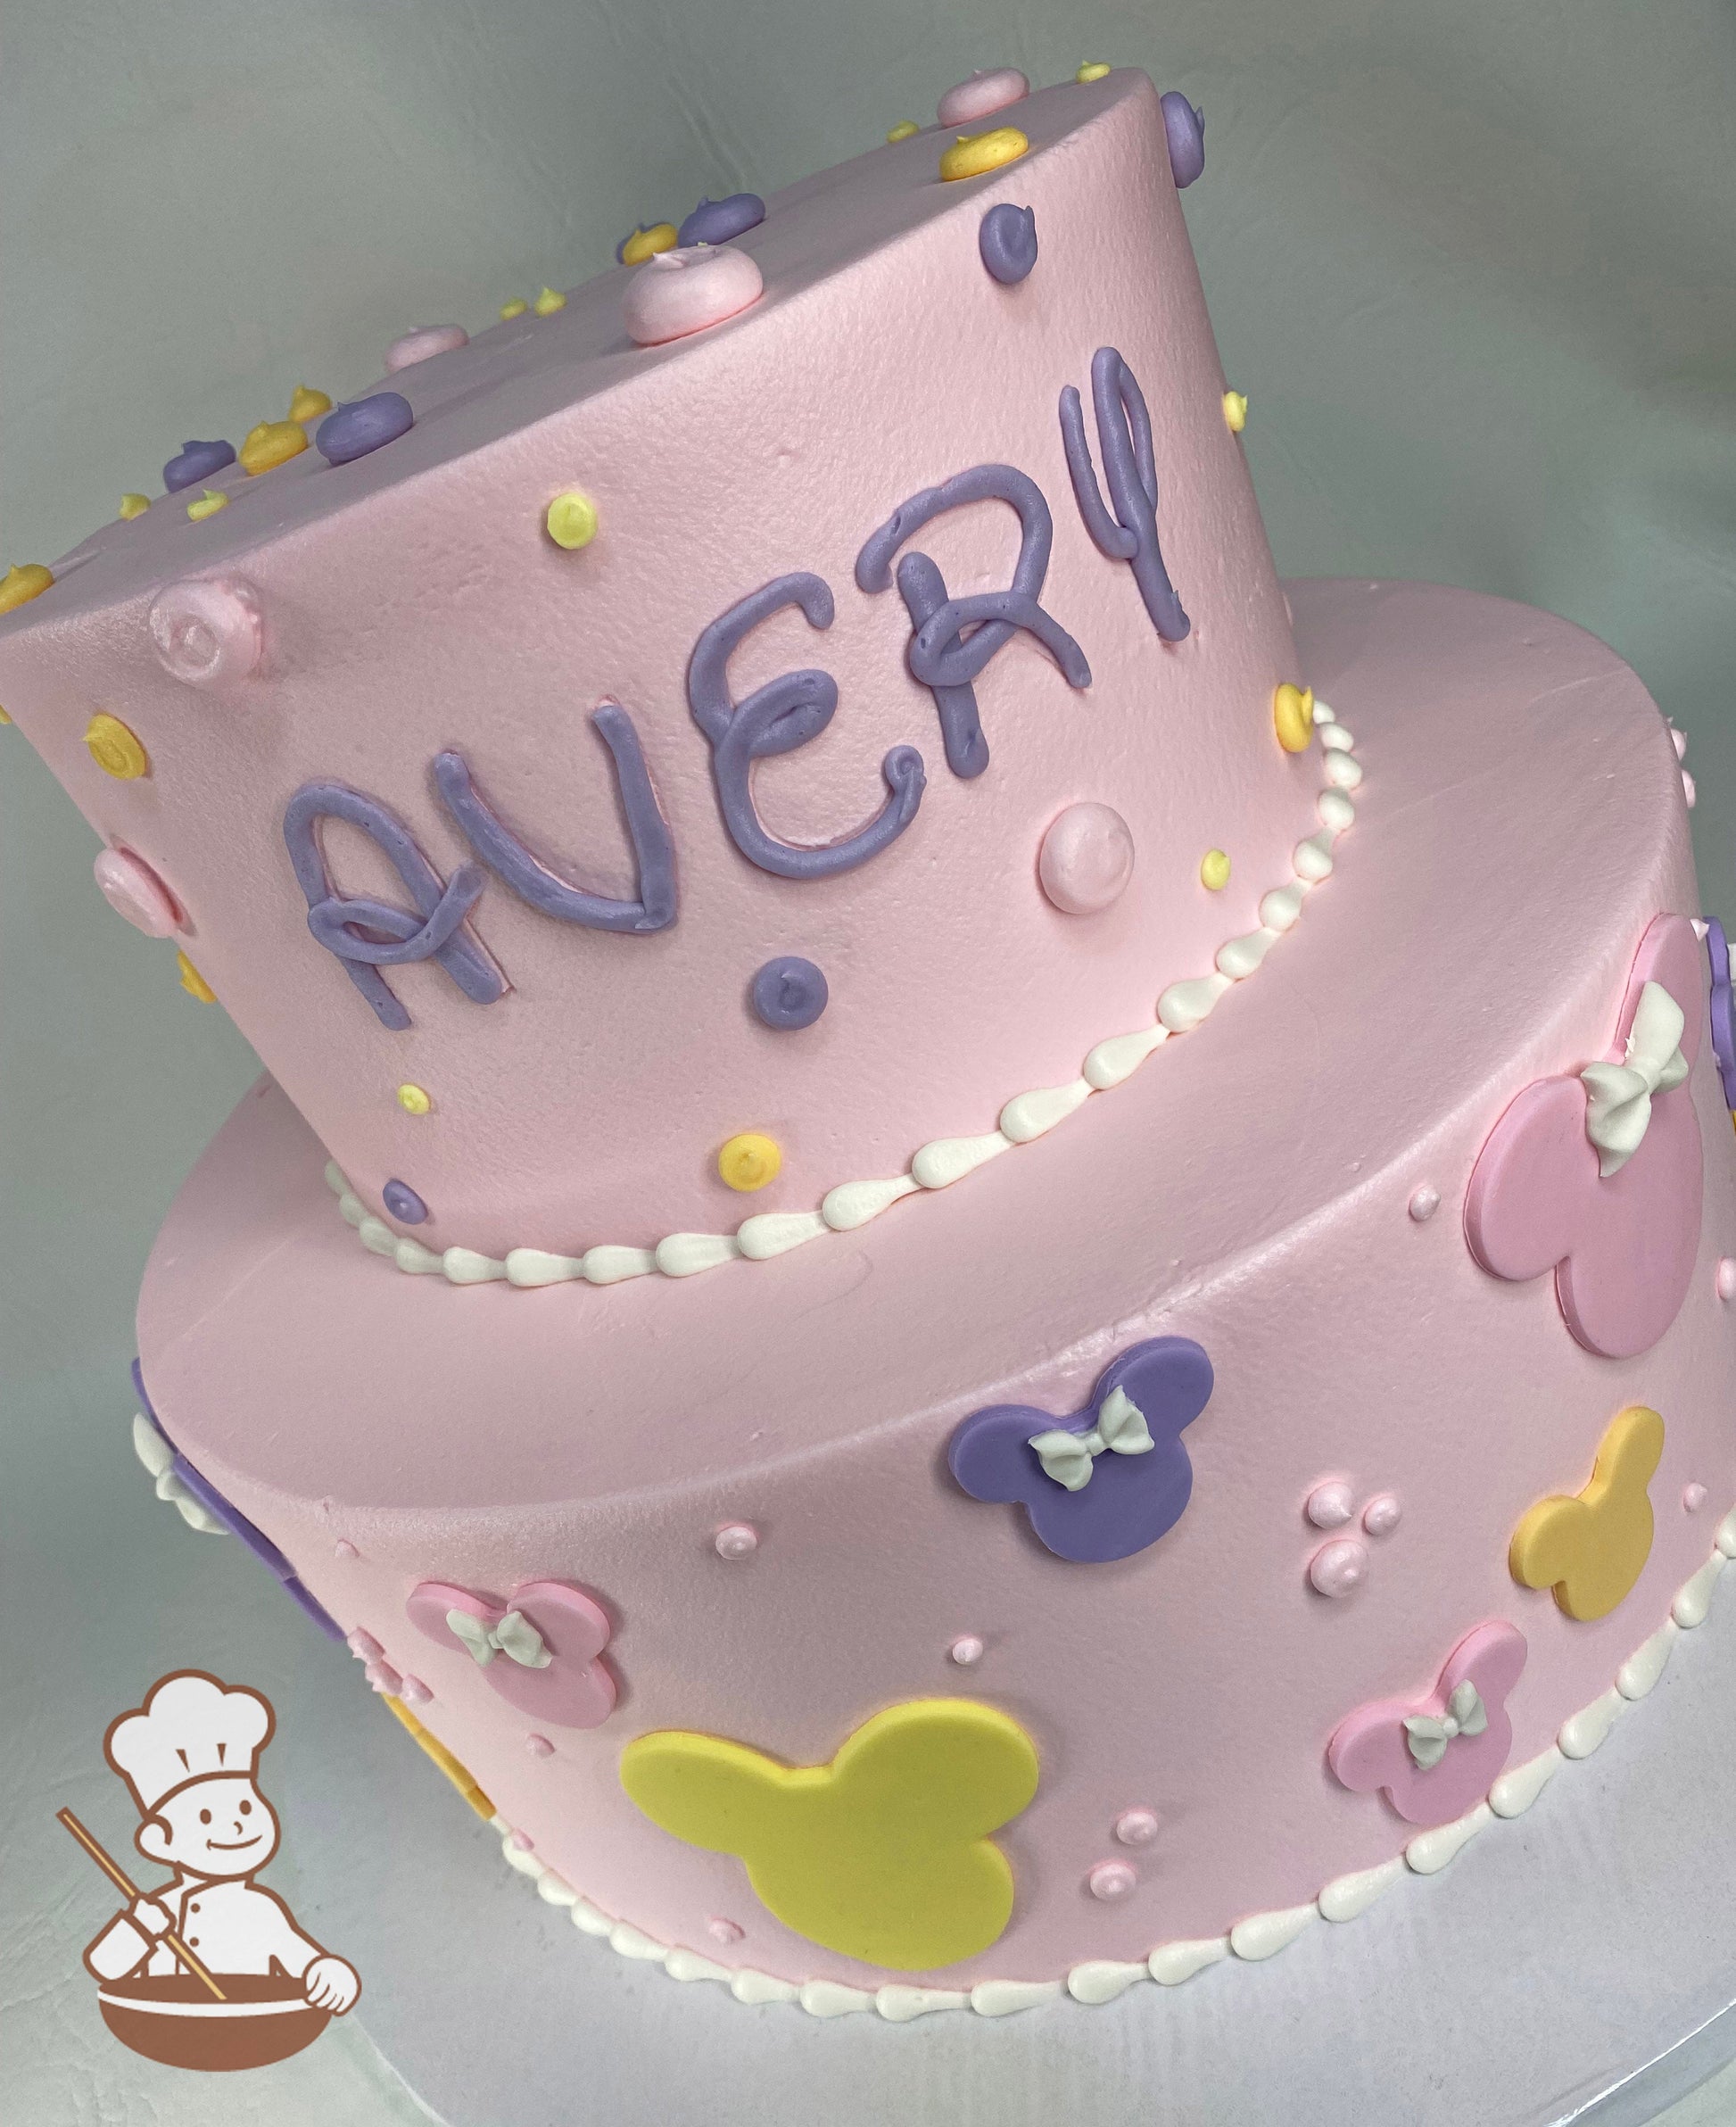 2-tier cake with smooth pink icing and decorated with yellow, purple and pink fondant Minnie Mouse silhouettes with small fondant bows.